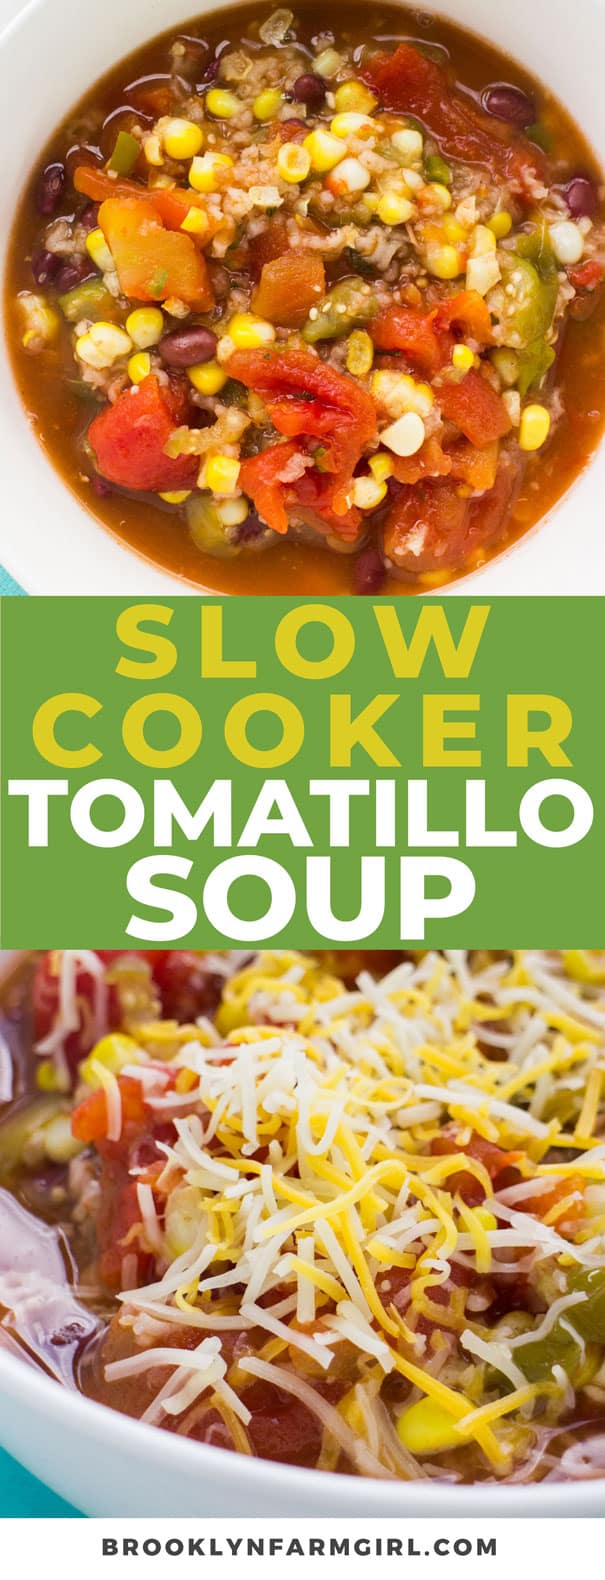 This vegetarian recipe for Slow Cooker Tomatillo Soup is a comforting meal filled with a hearty blend of black beans, rice, healthy vegetables and seasonings, all cooked to perfection. A comforting soup that you can feel good about eating!